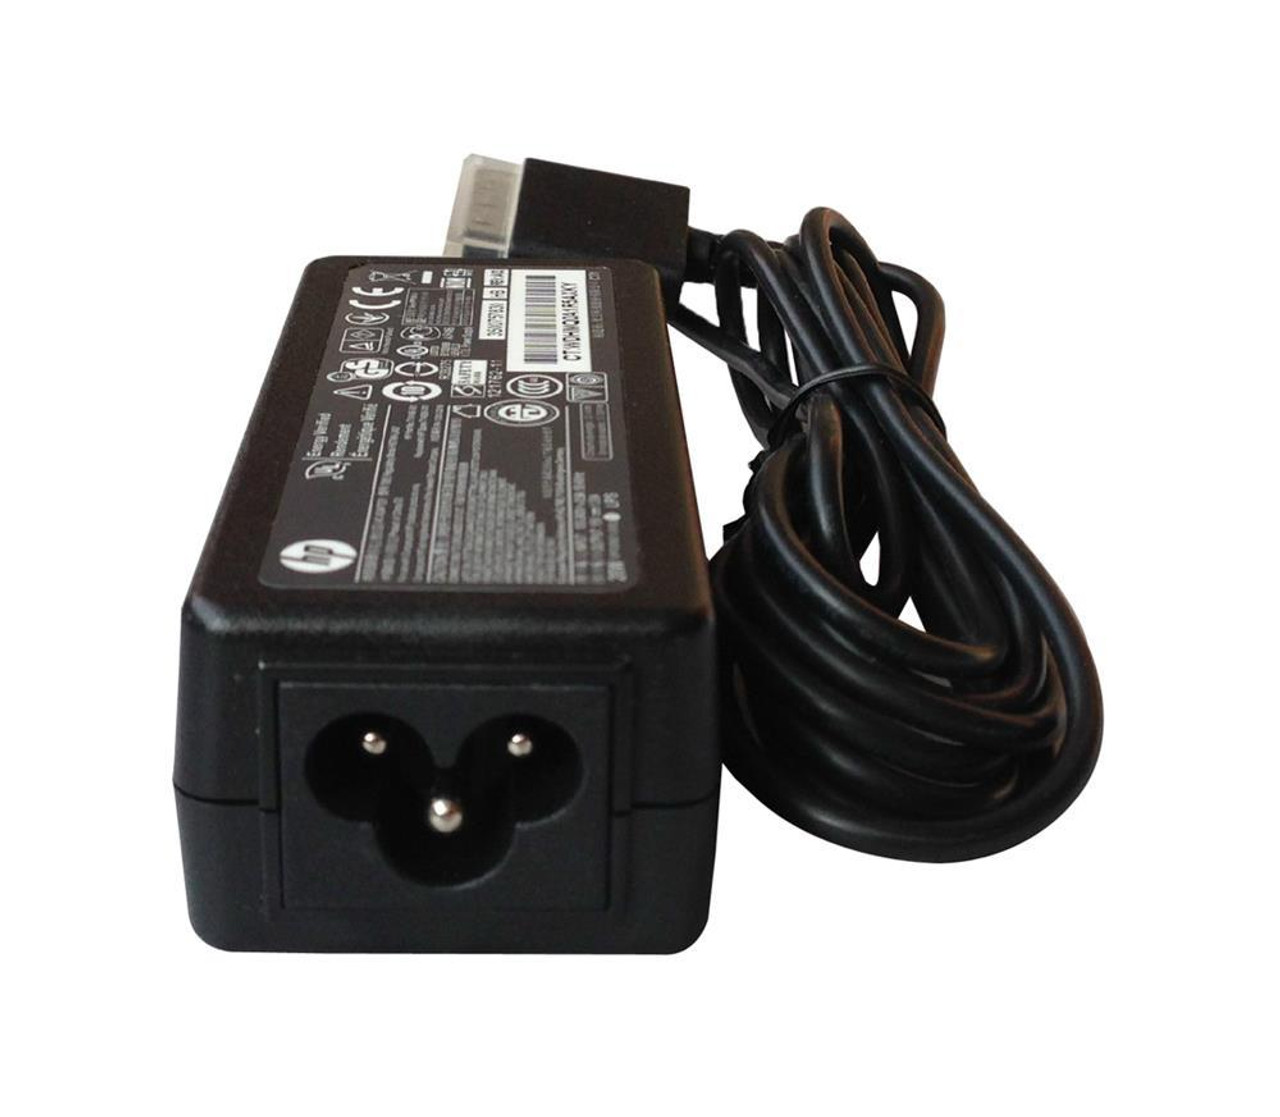 714148-001 HP 20-Watts 15V 1.33A AC Power Adapter for L